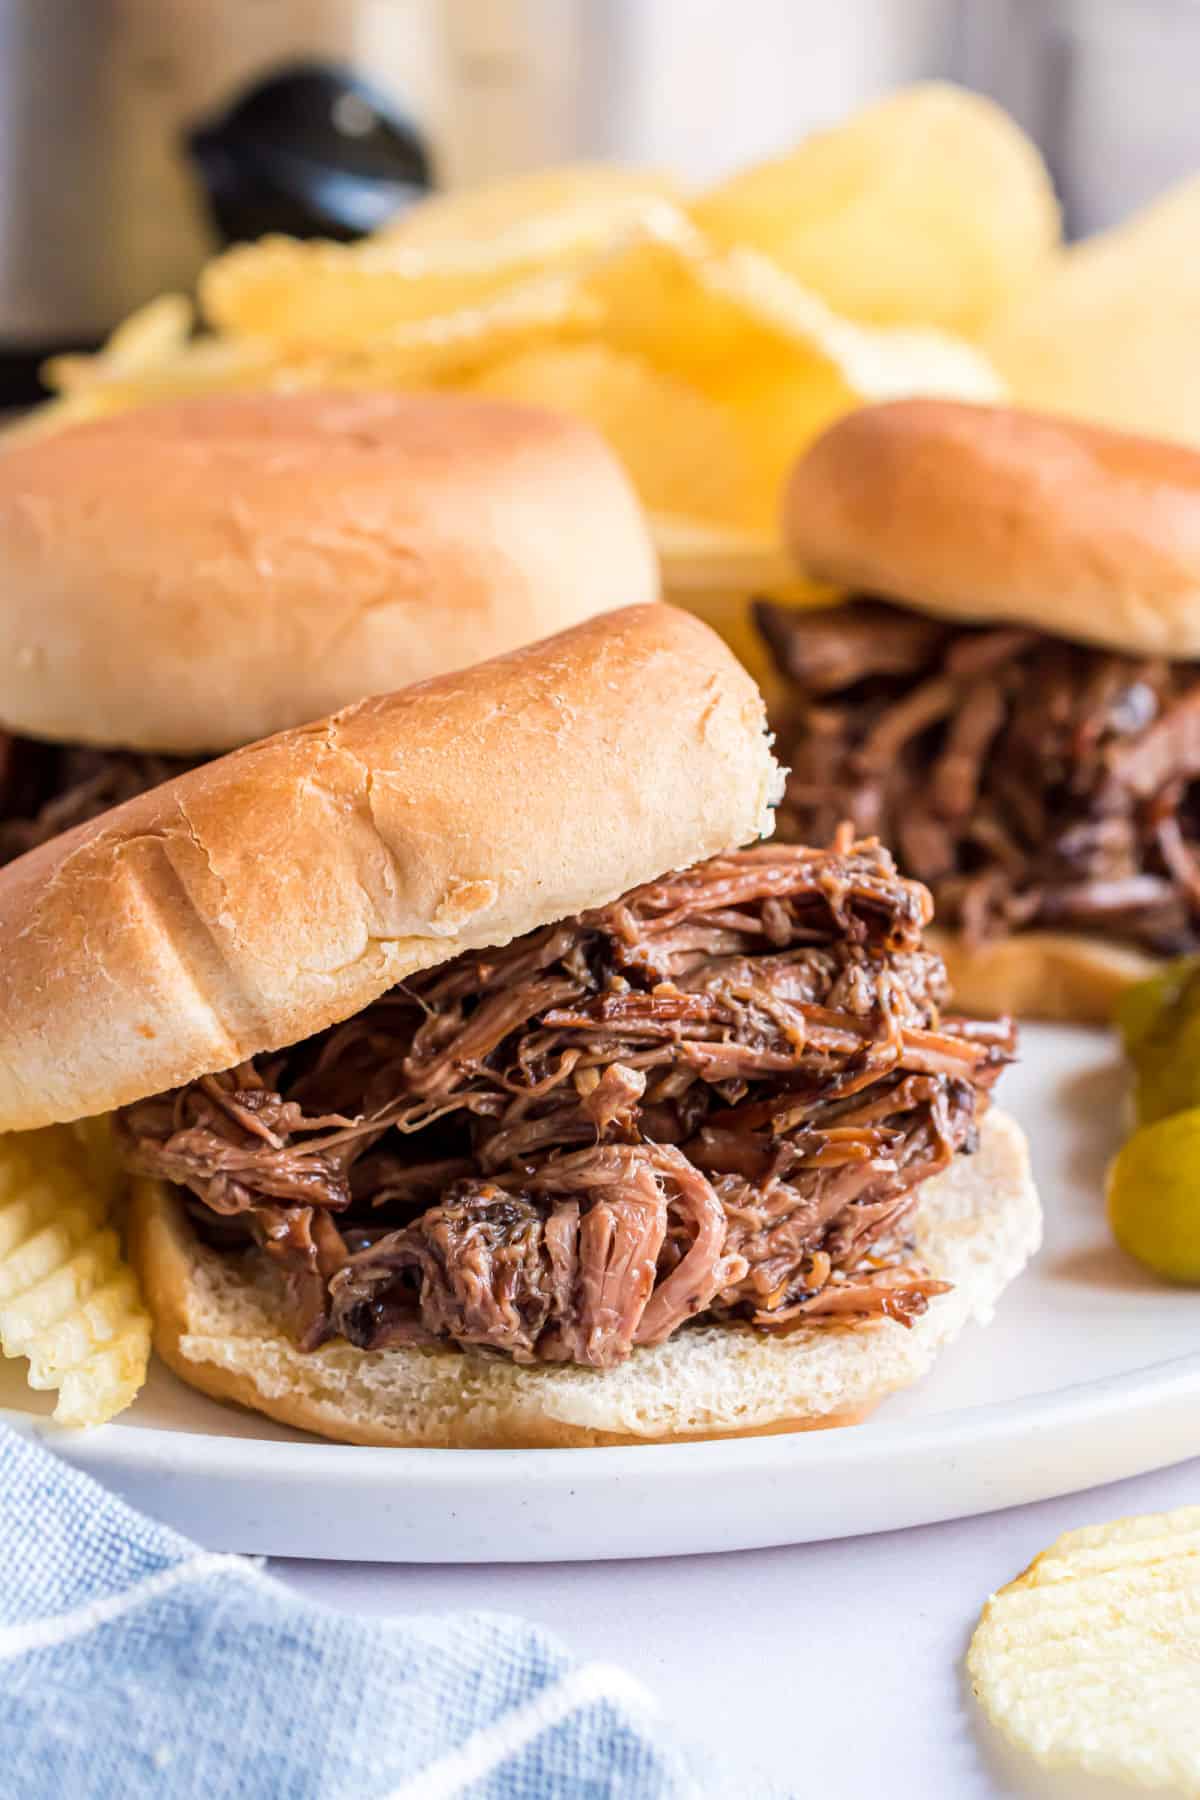 Shredded beef on a bun served on a white dinner plate with potato chips.